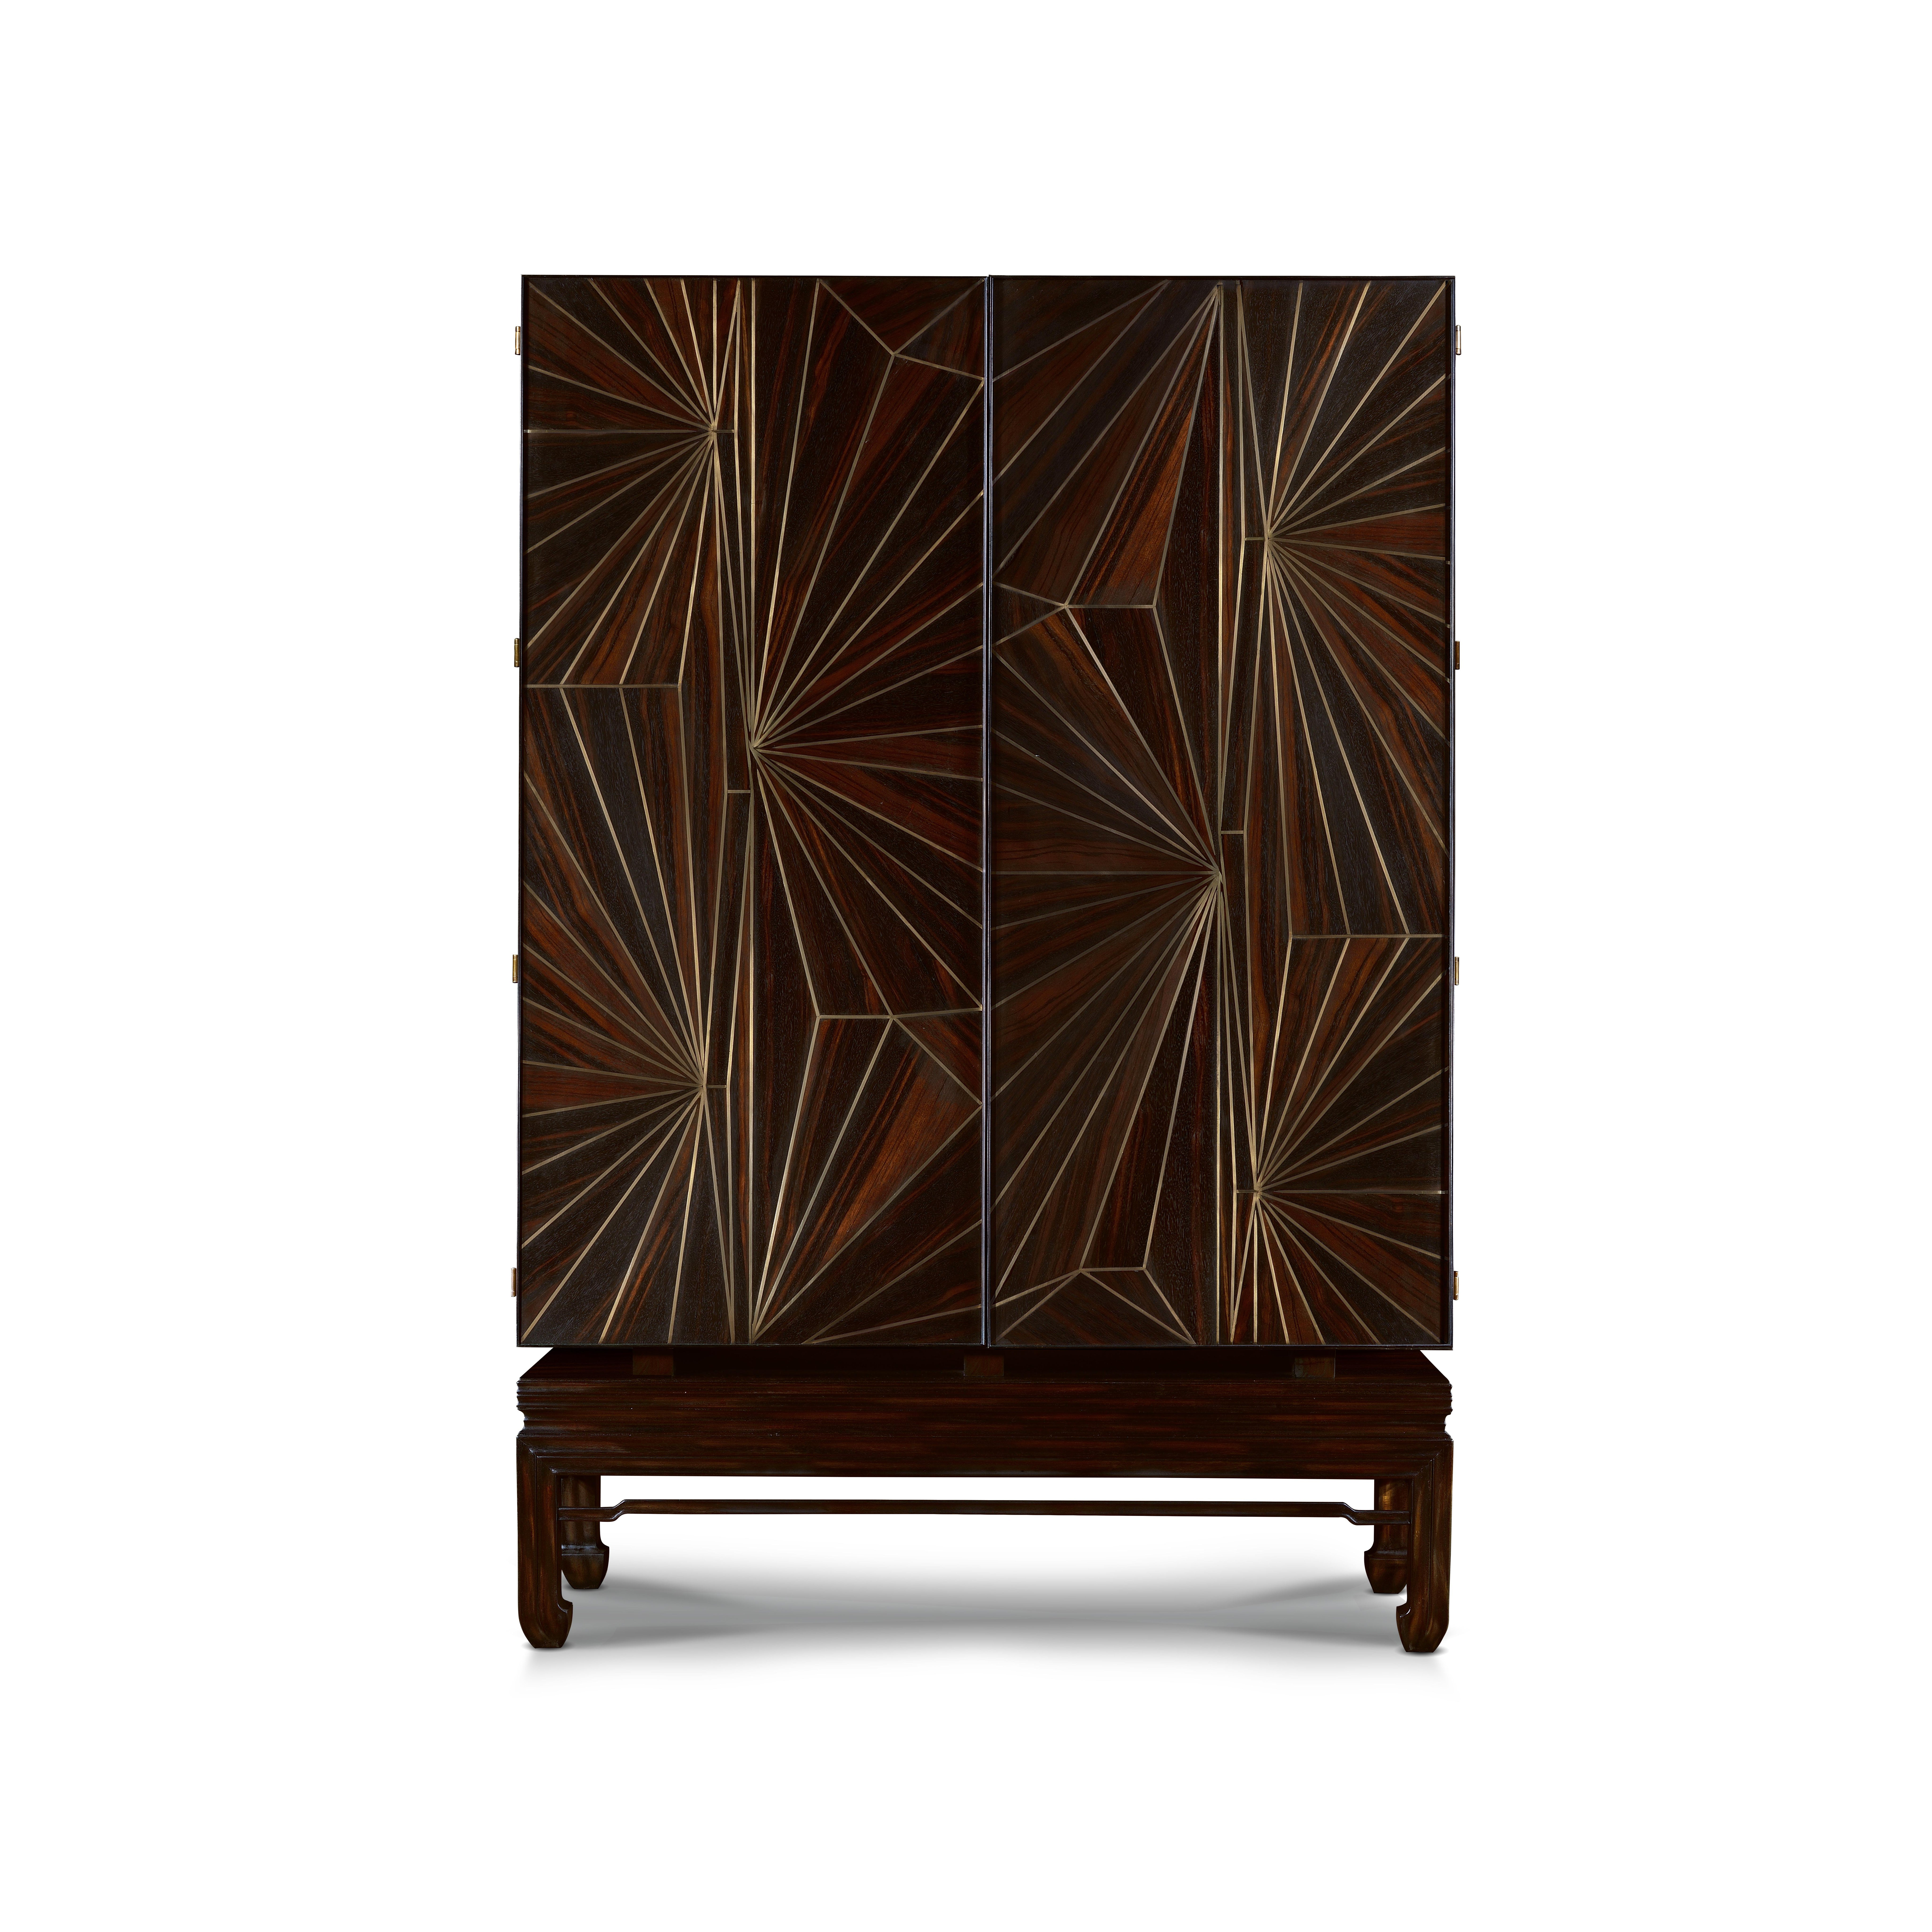 This exquisite armoire is a luxurious bar cabinet. Ebony veneer and intricate brass inlays. Will be the centerpiece in an eclectic and avant-garde interior. The cabinet stands out with its mesmerizing combination of hues and intricate patterns,